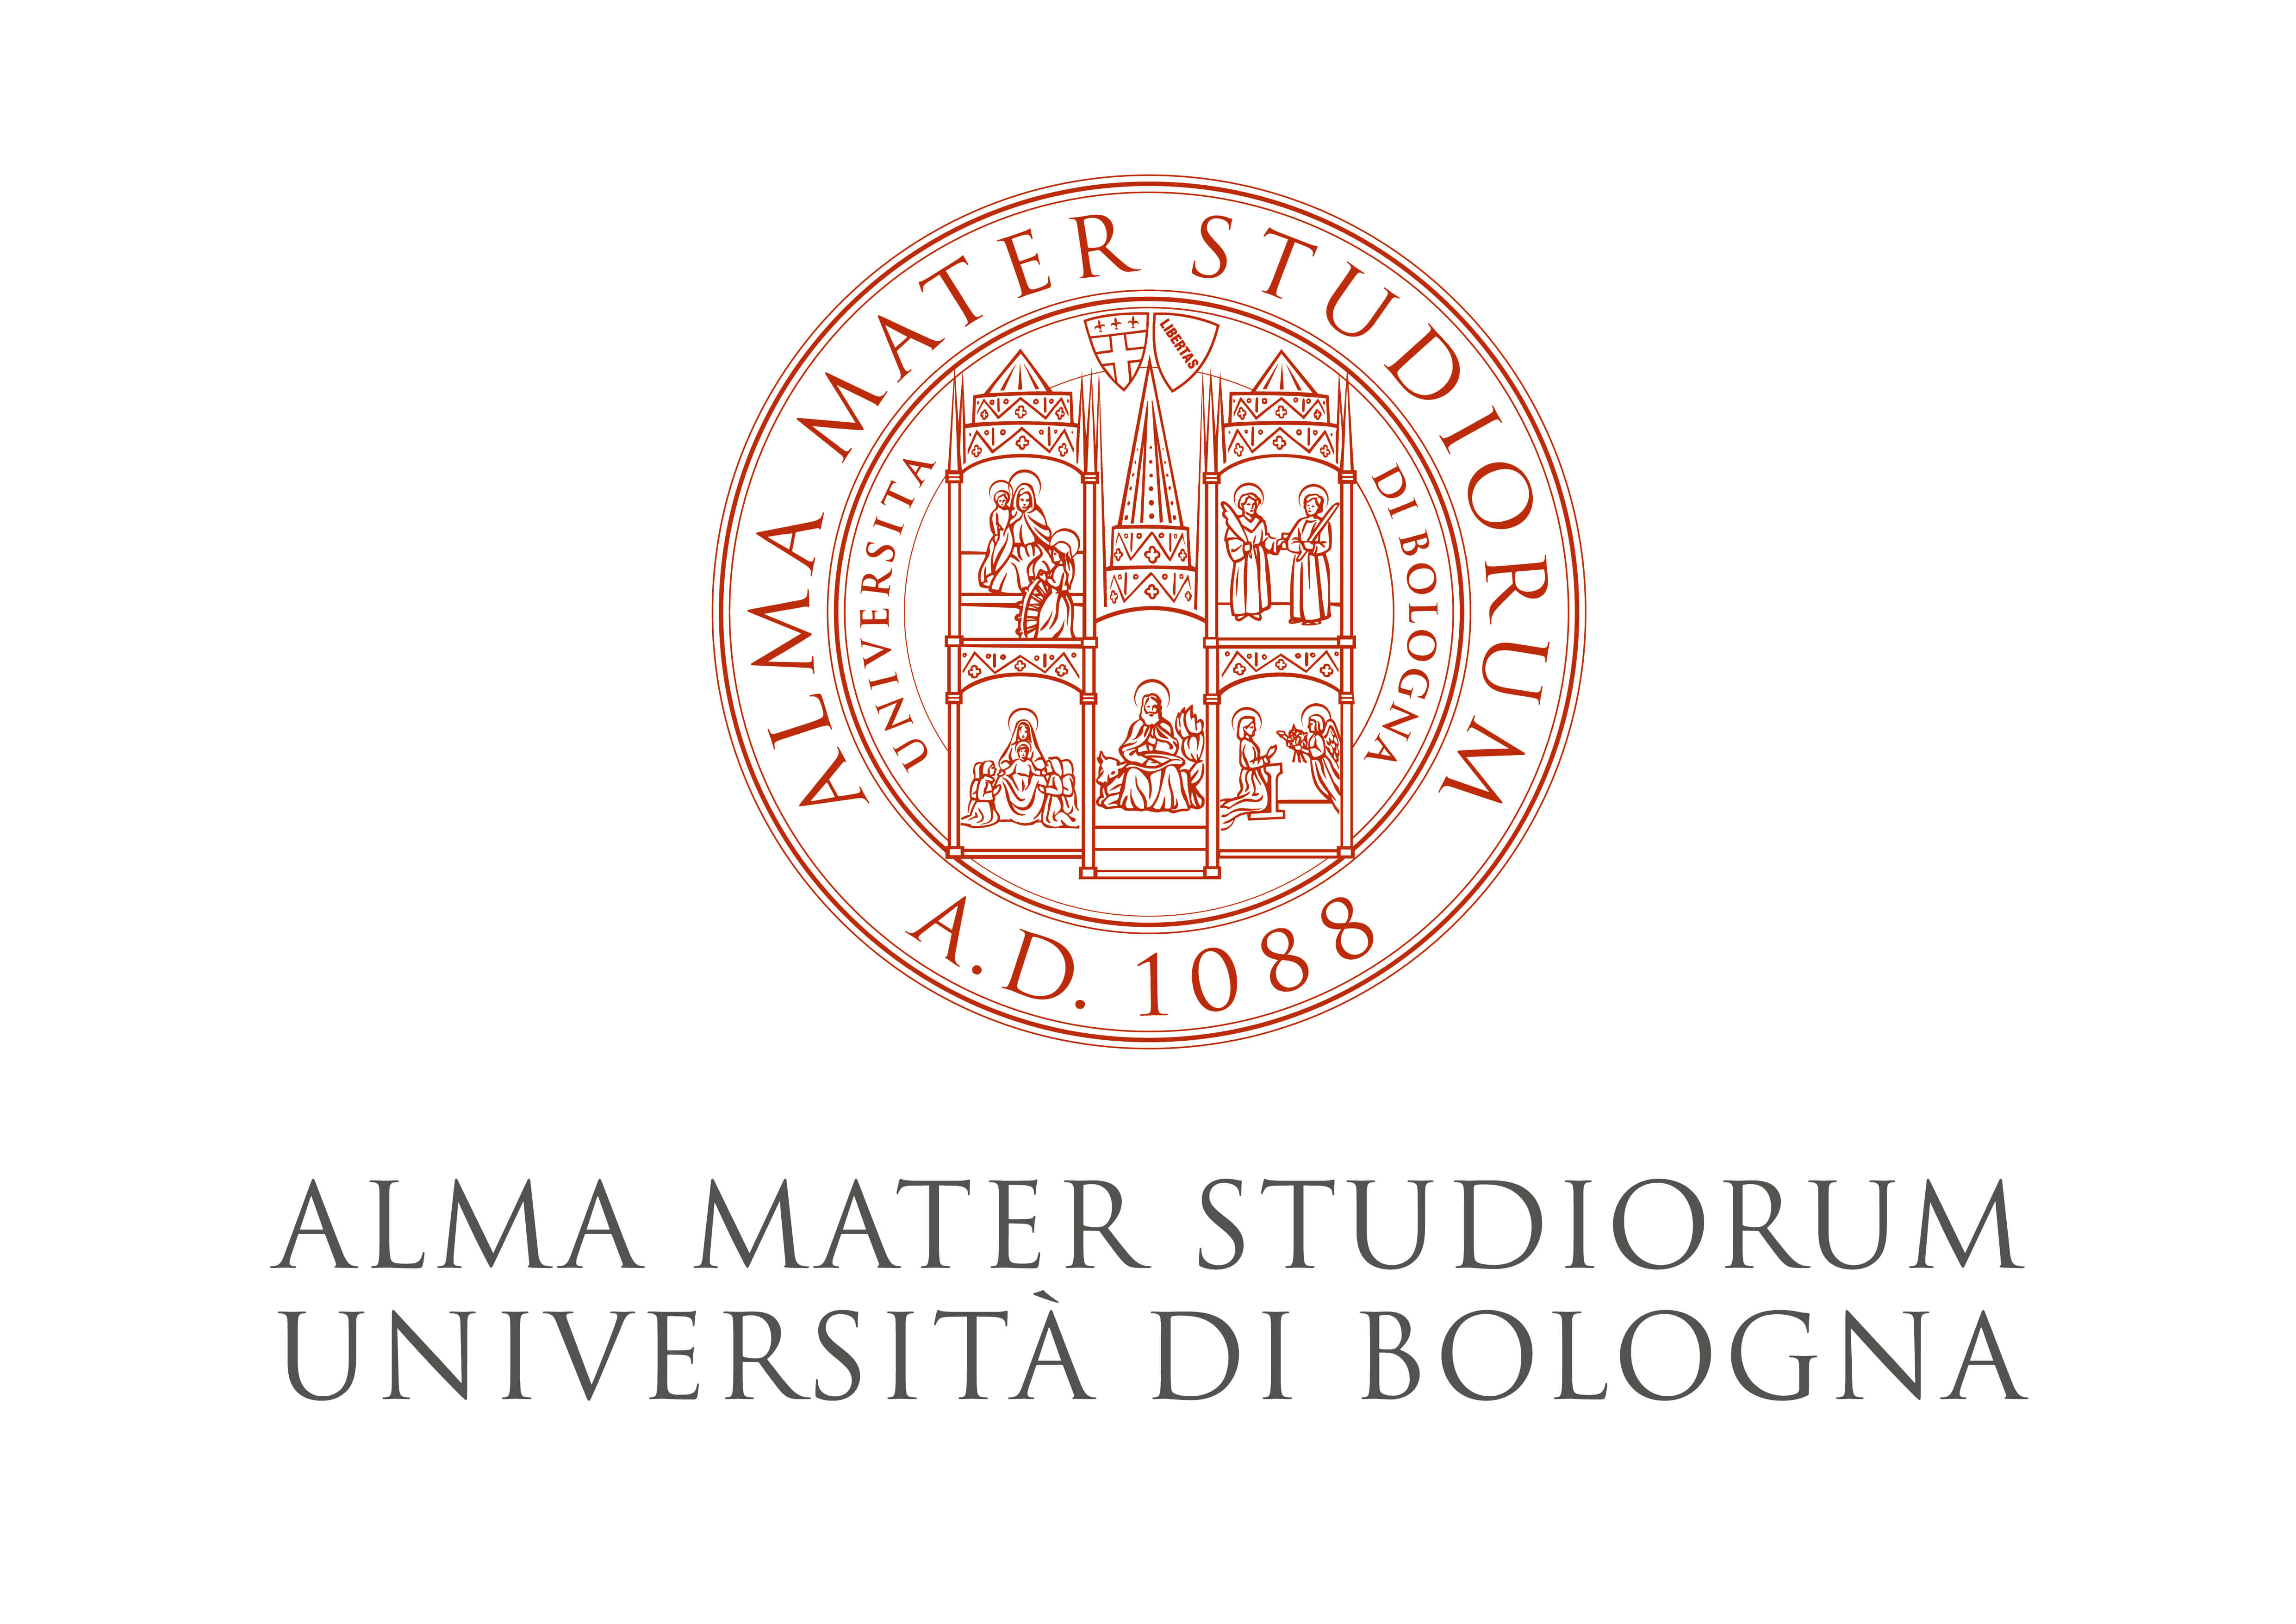 Logo of the The University of Bologna